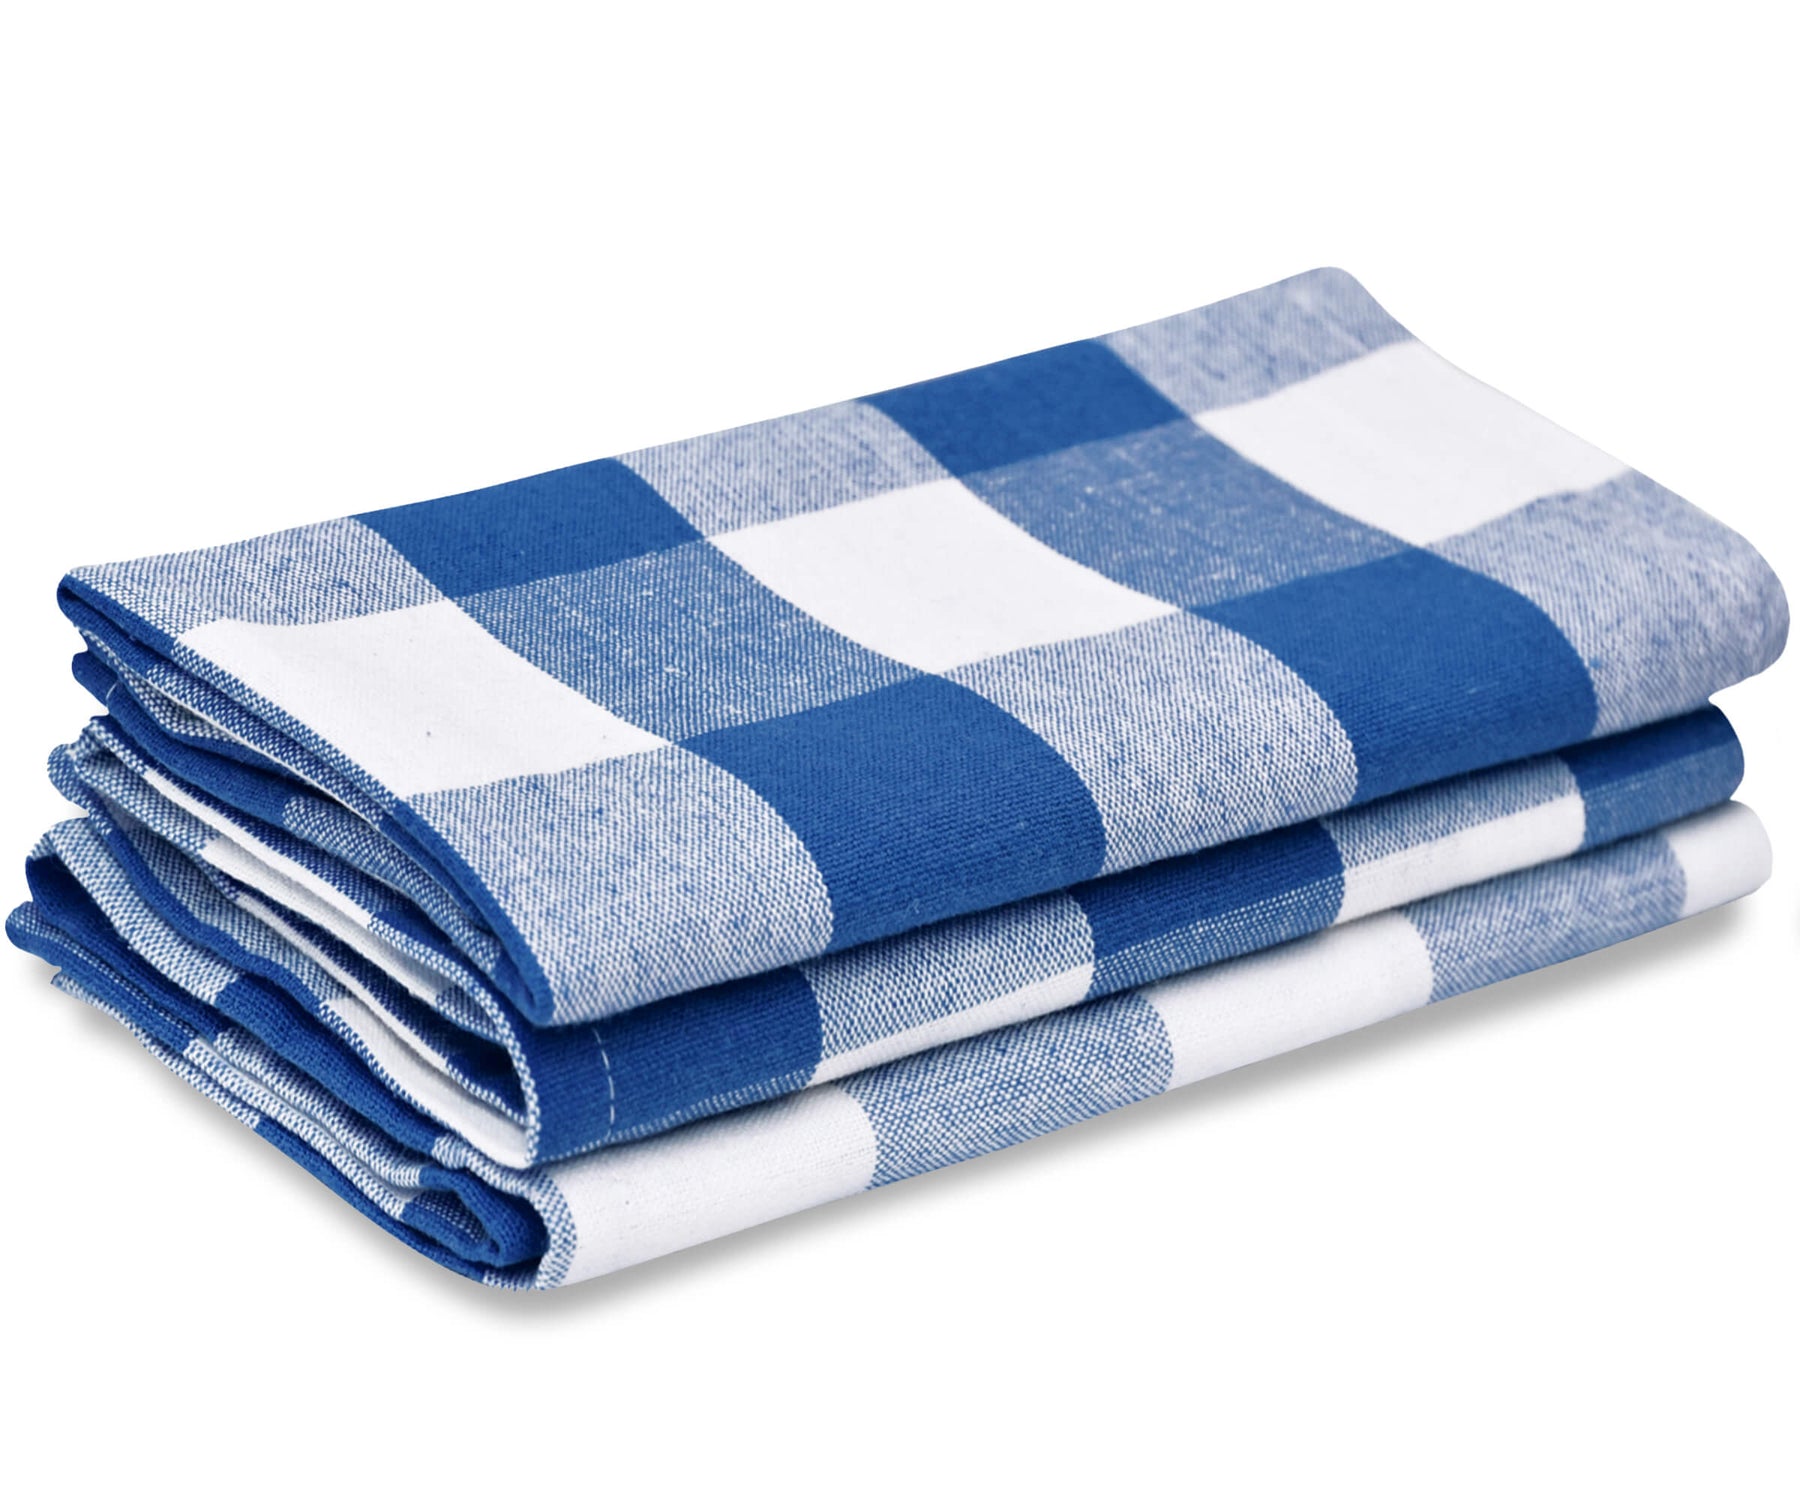 These blue embroidered dish towels are made from 100% cotton and are perfect for a special occasion or as a thoughtful gift.